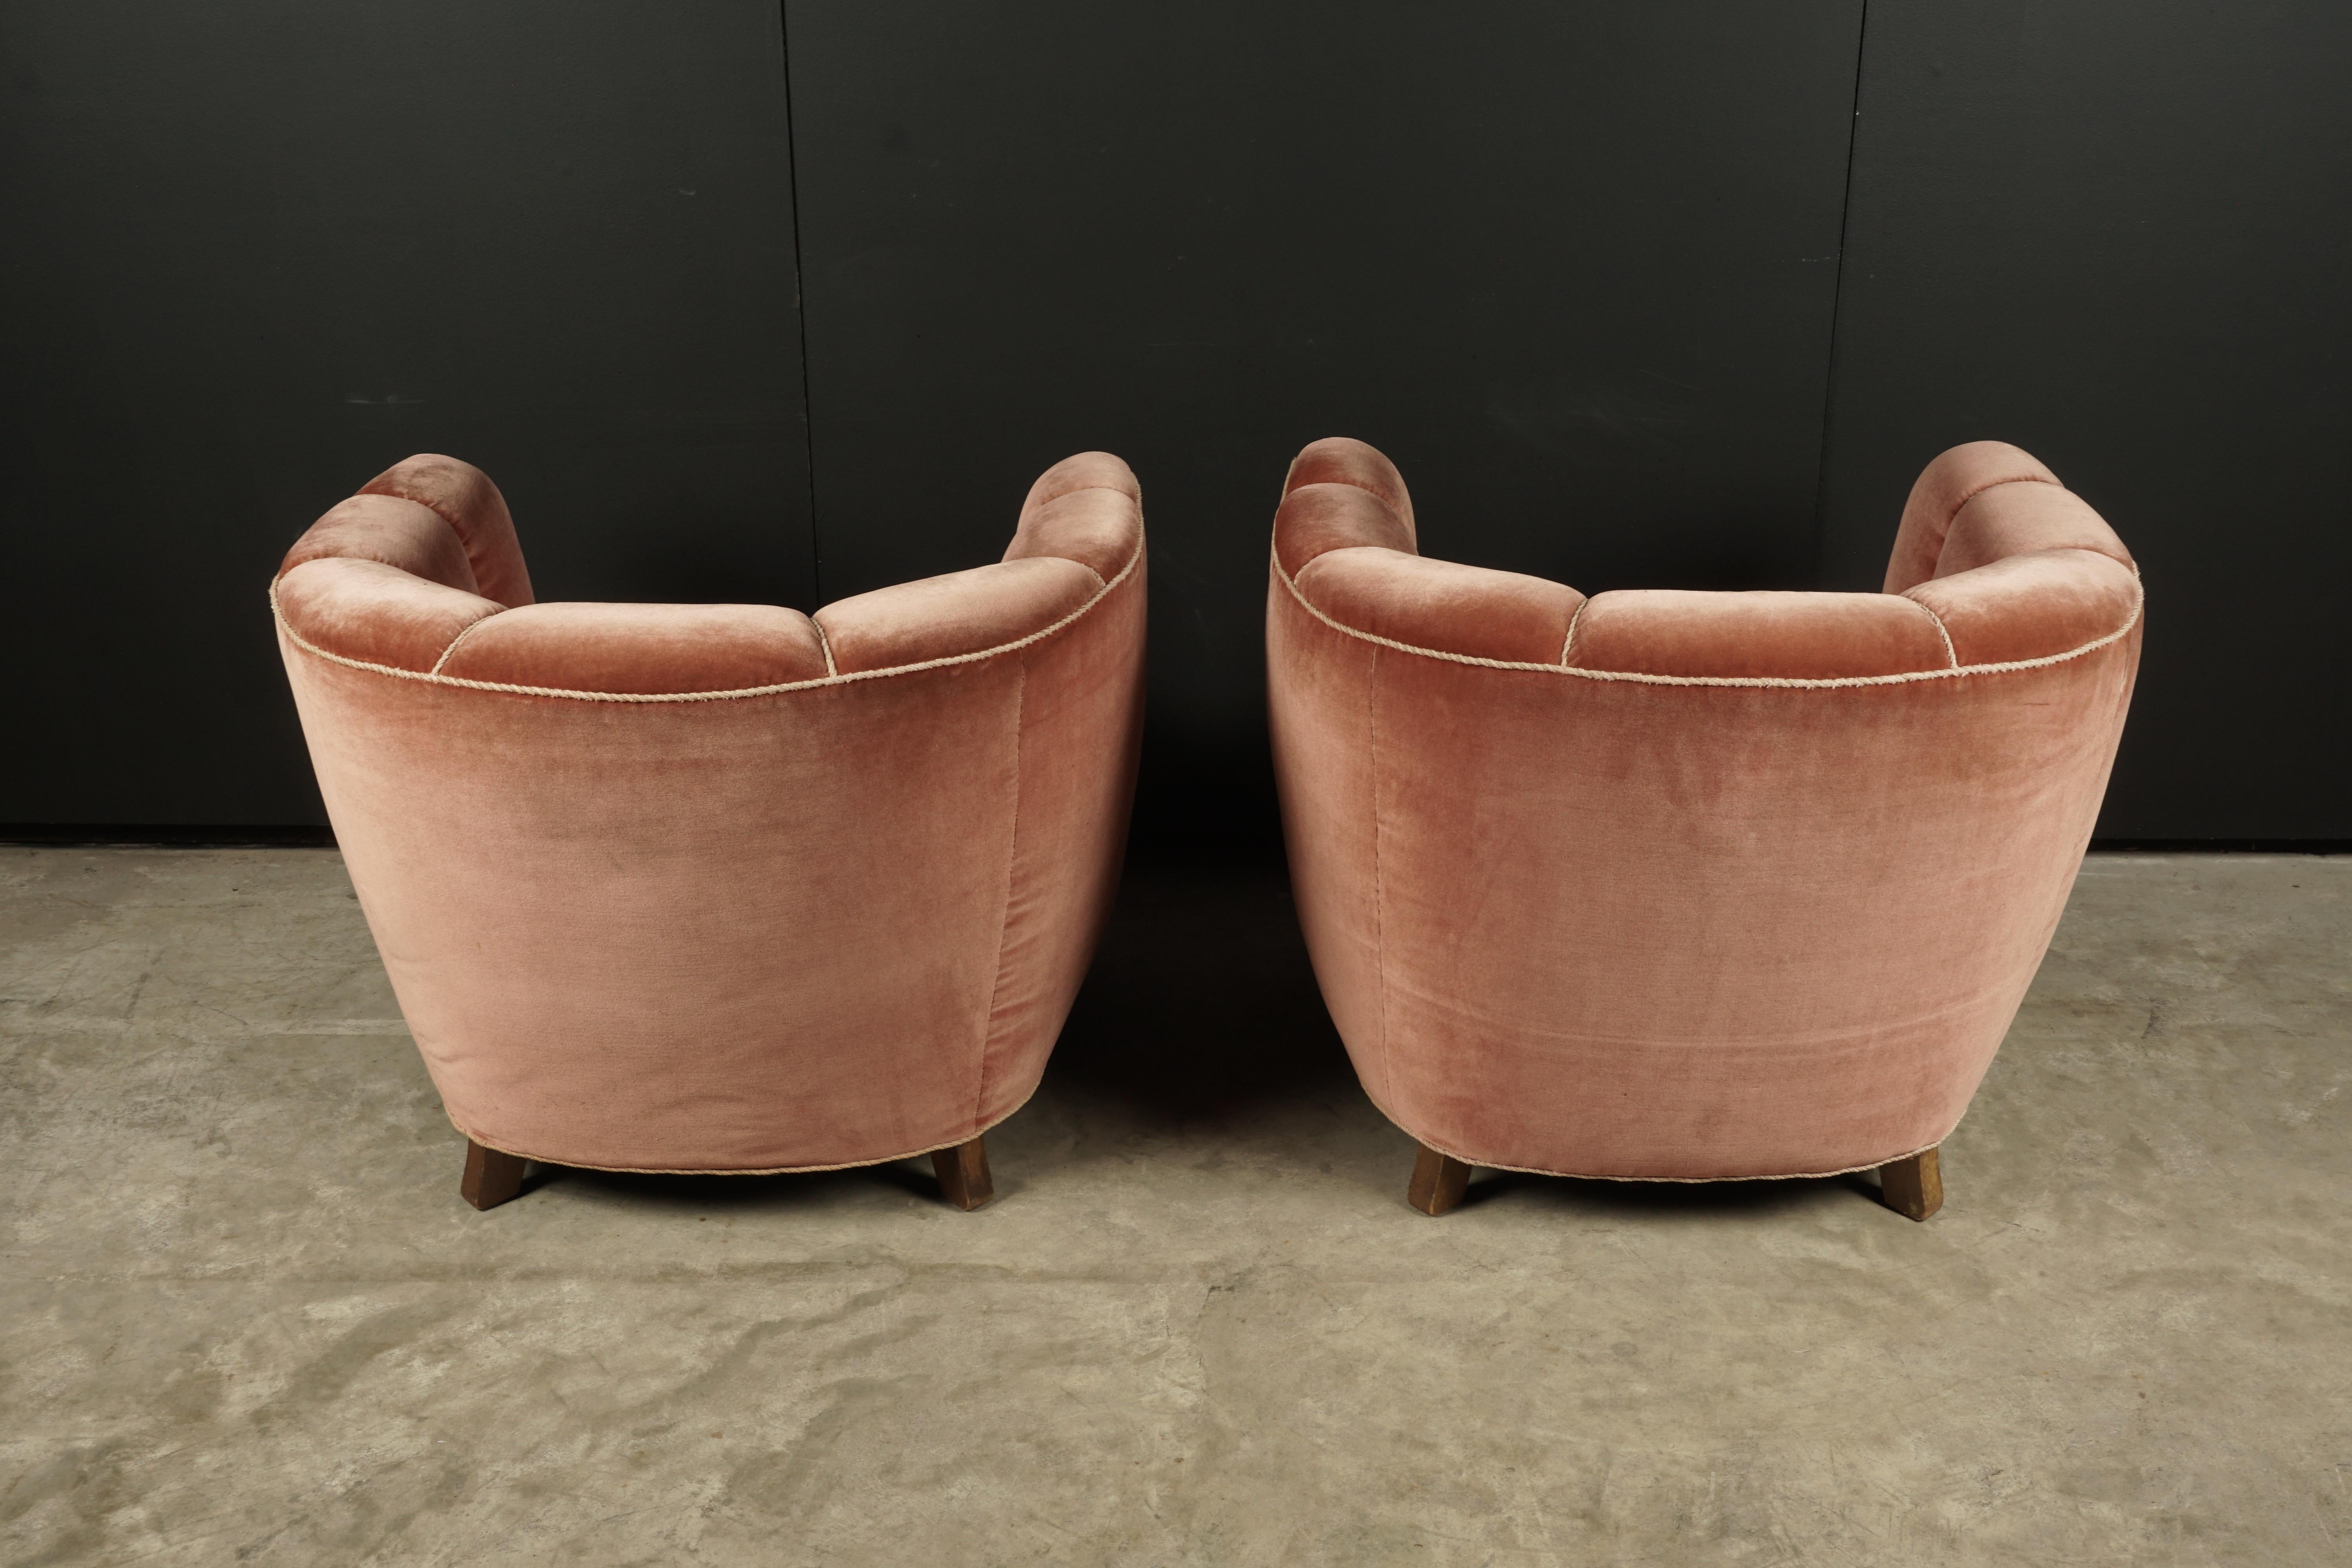 Mid-20th Century Vintage Pair of Art Deco Lounge Chairs from Denmark, circa 1950